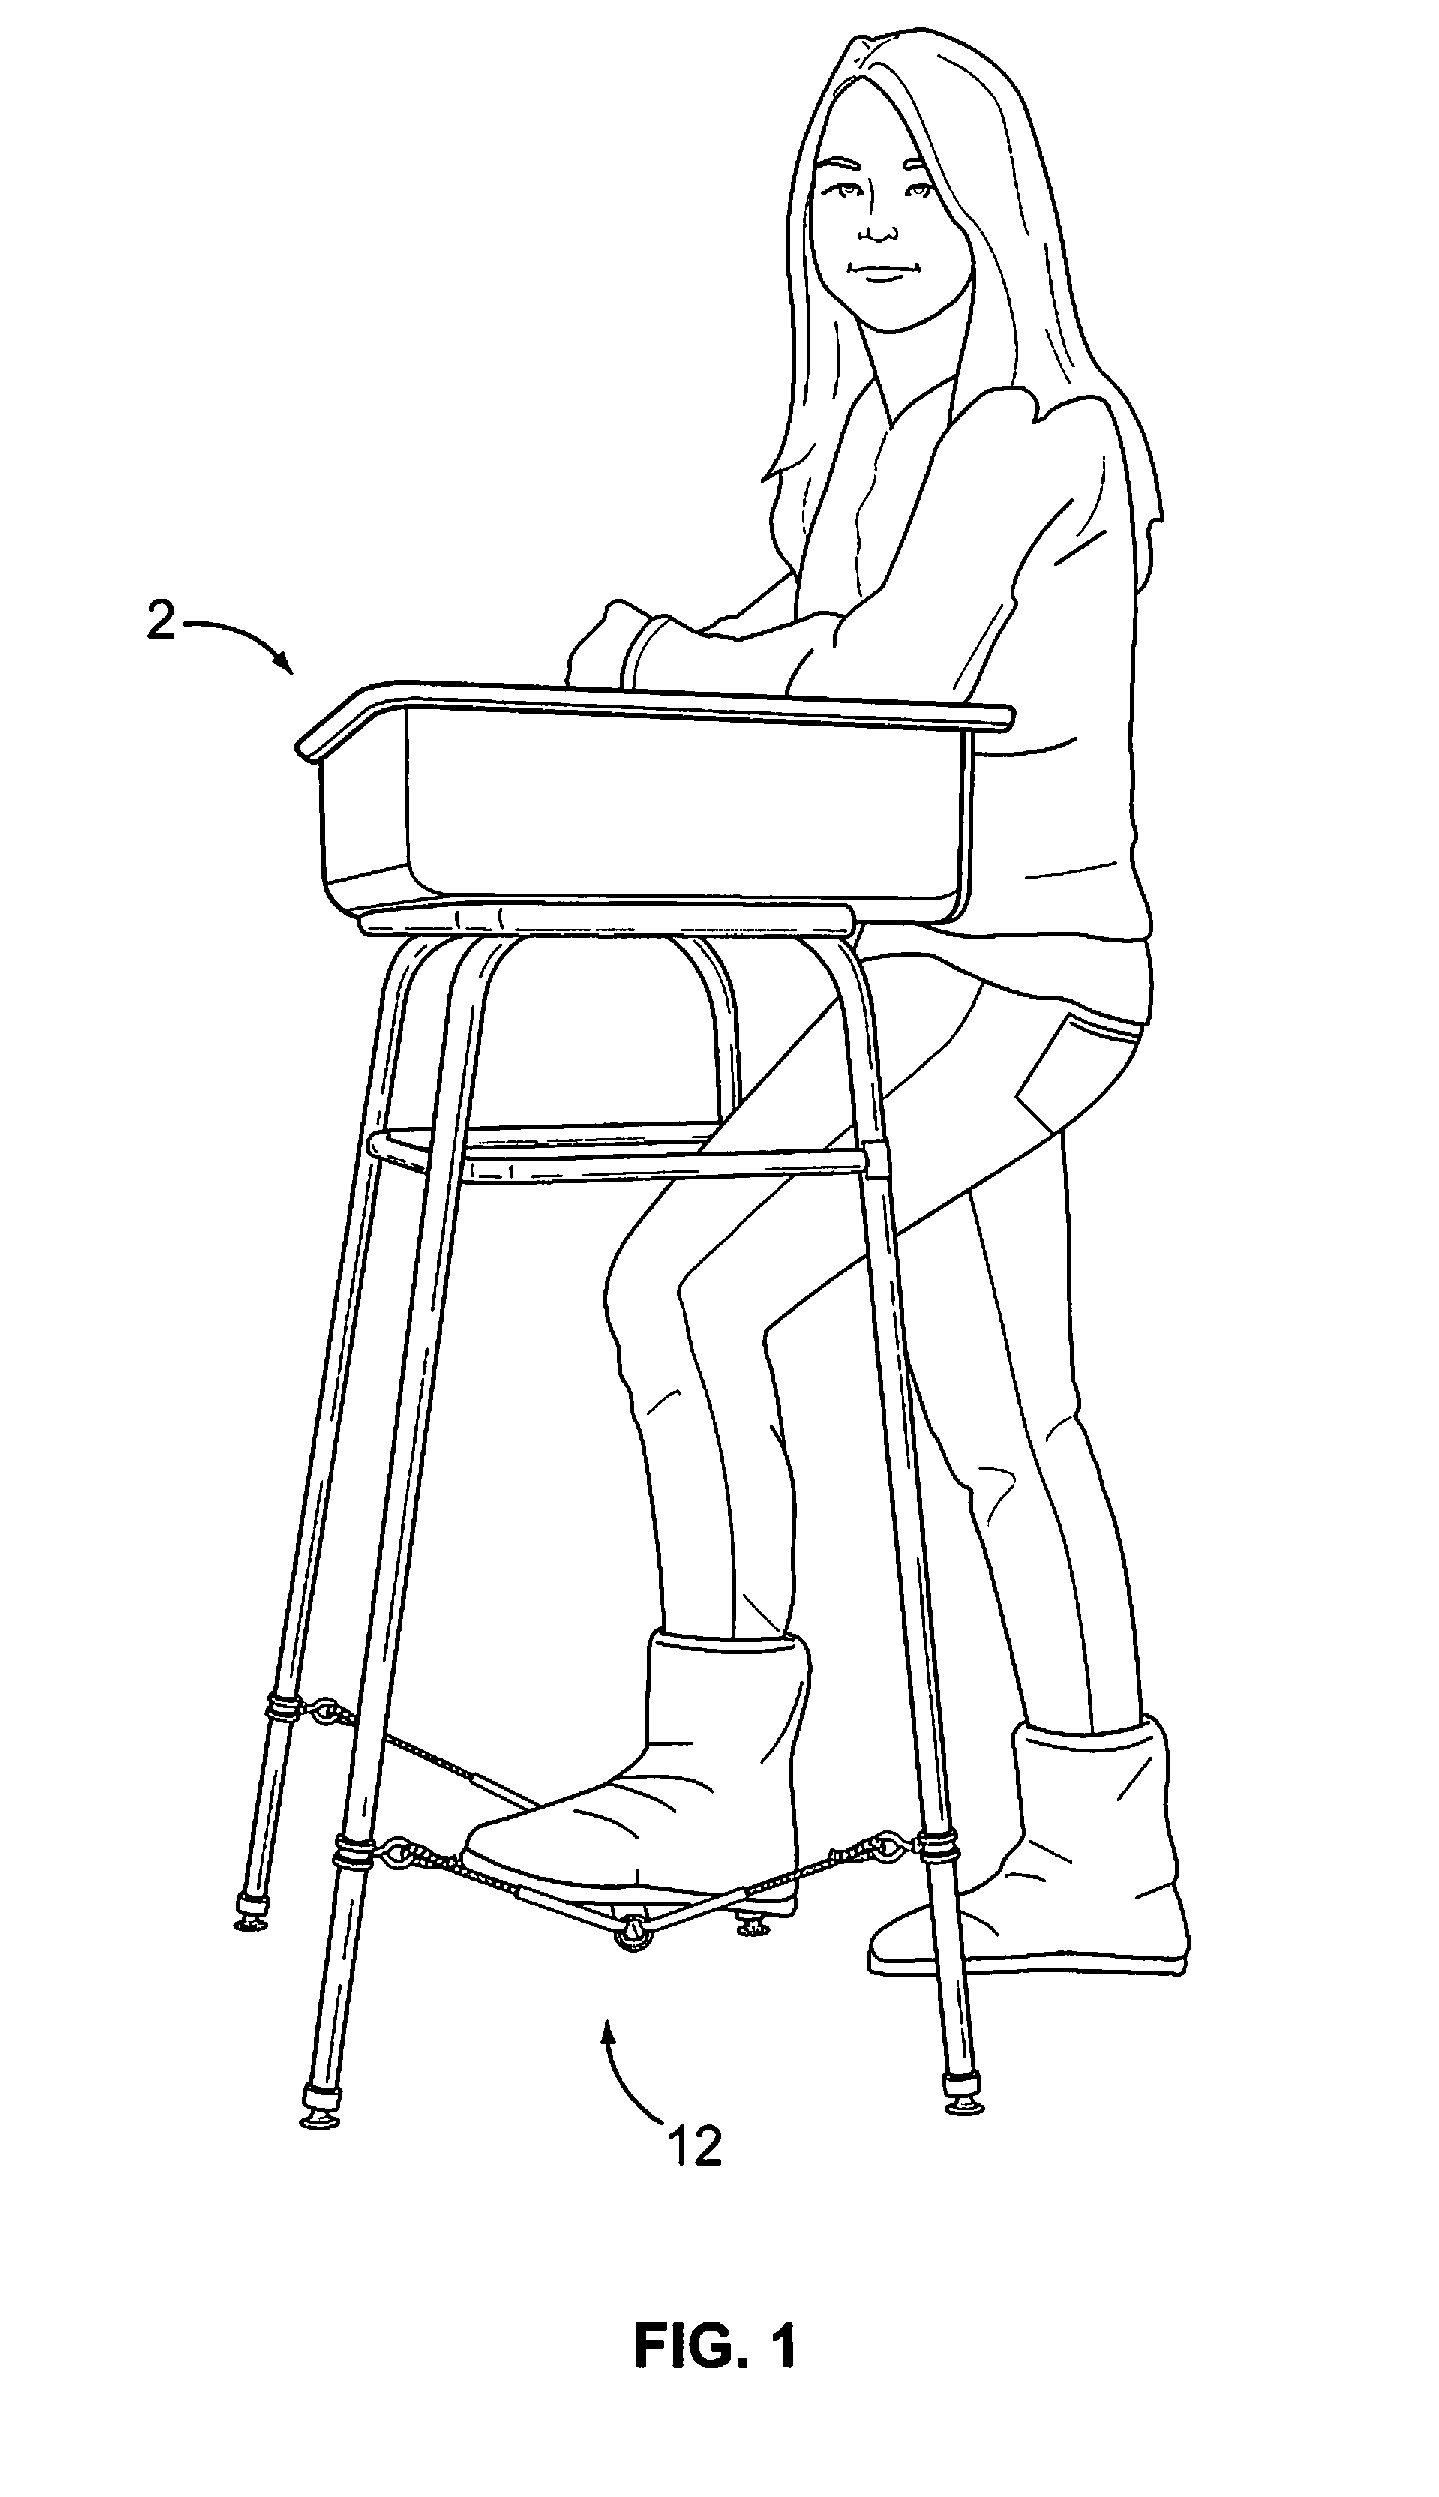 Physical activity apparatus and kit